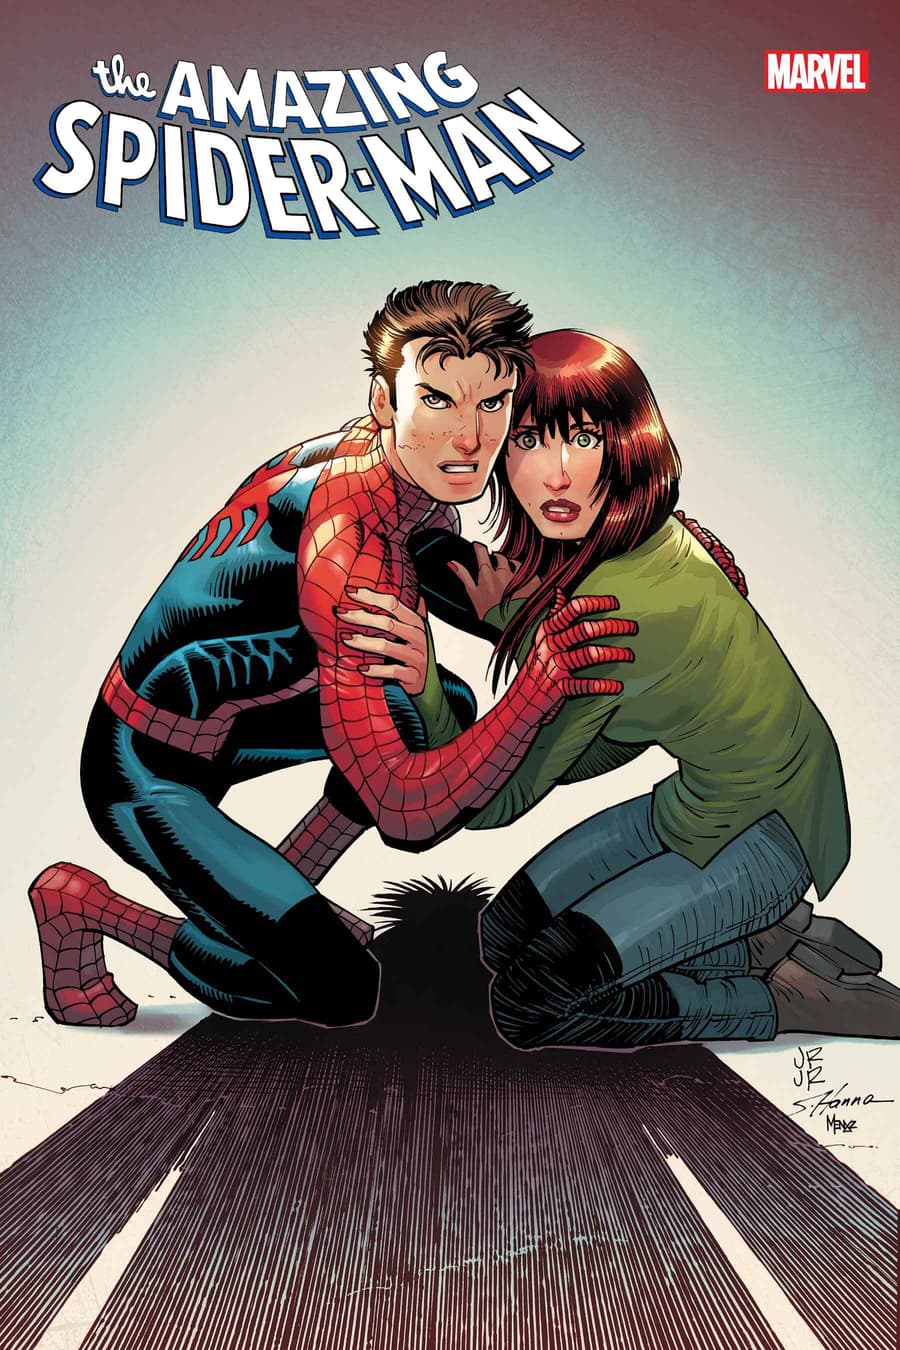 THE AMAZING SPIDER-MAN (2022) #21 cover by John Romita Jr.